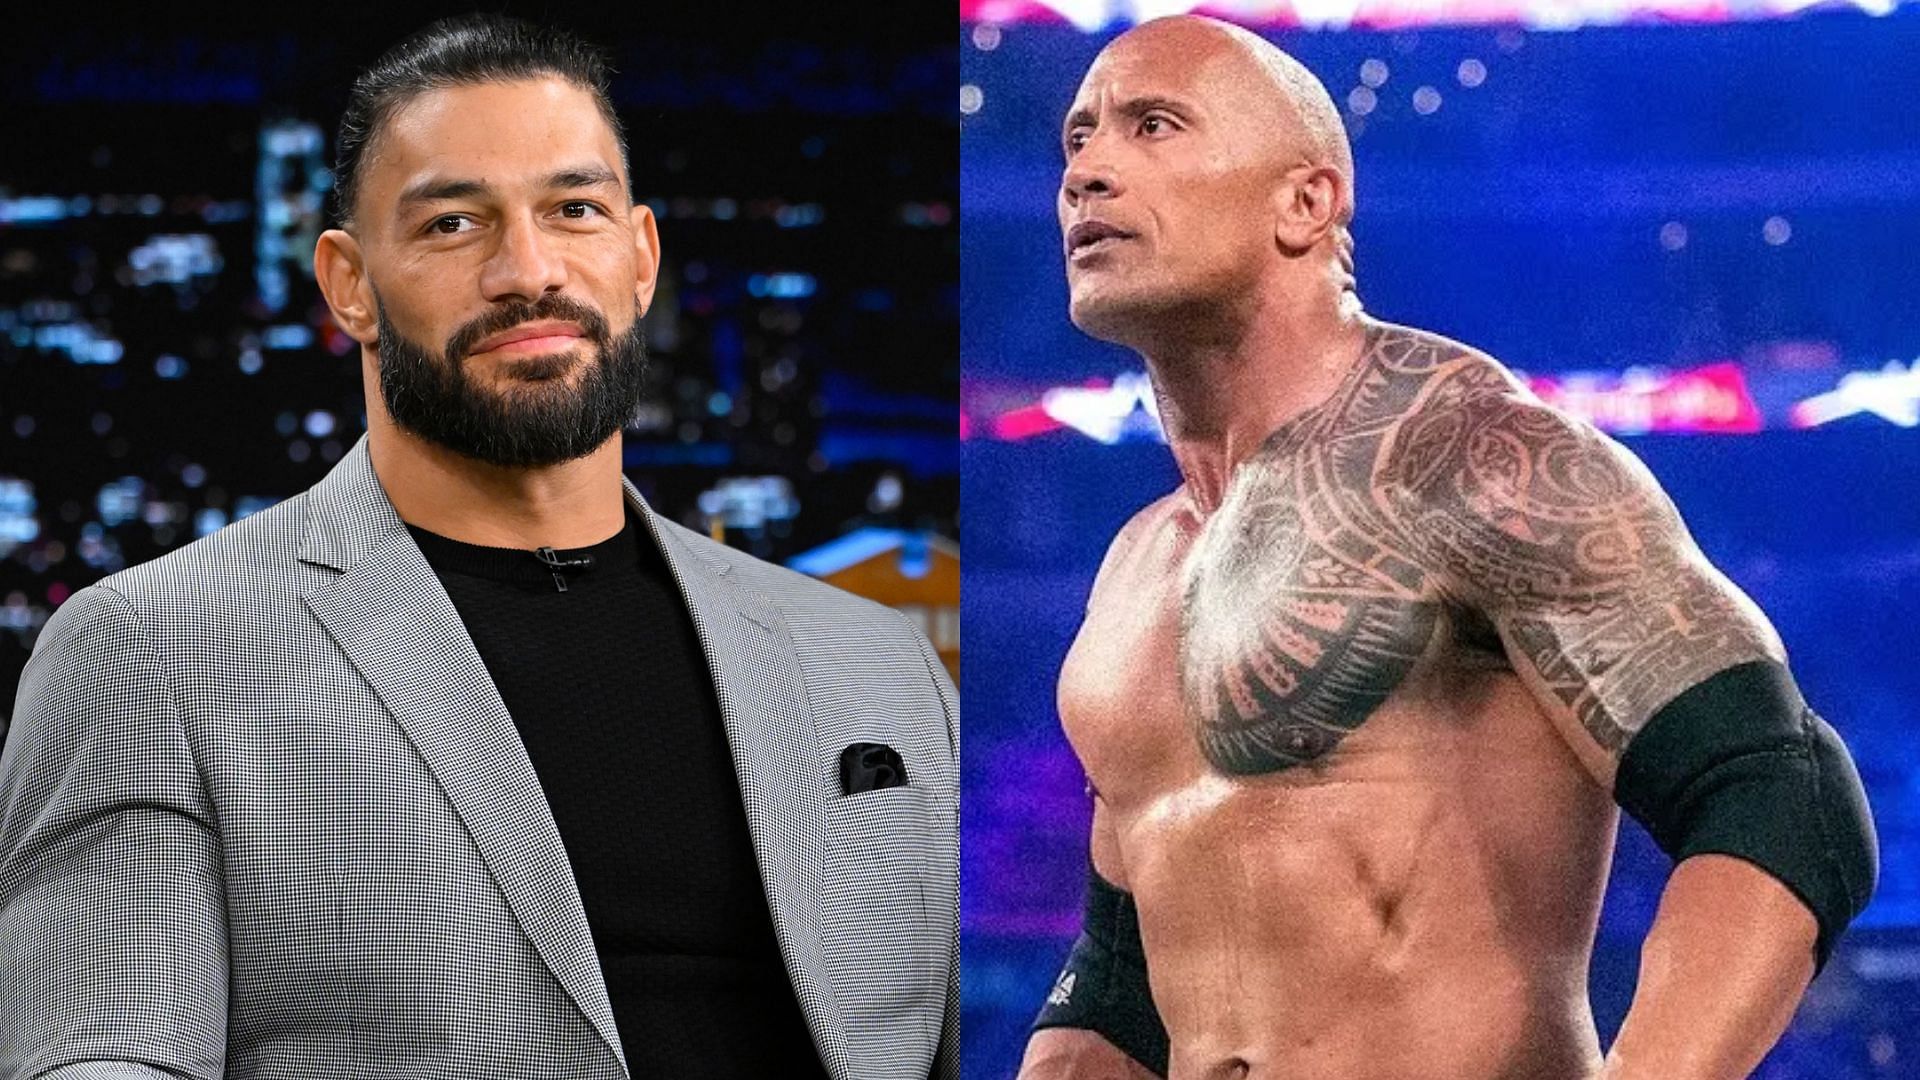 Roman Reigns and The Rock are cousins.